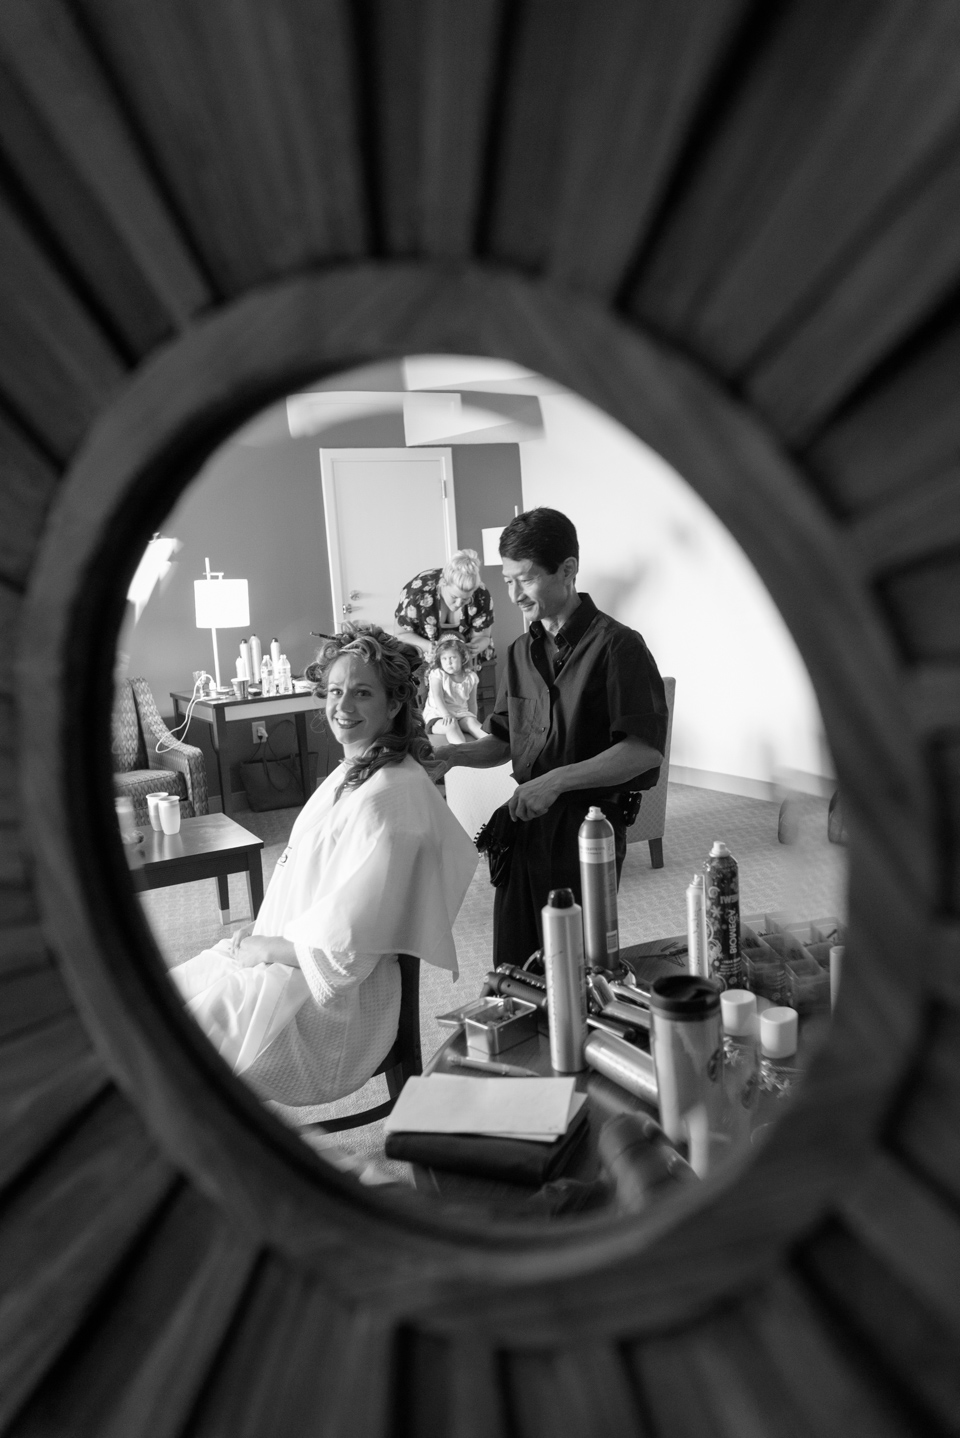 hair stylist and bride are photographed in a candid mirror reflection